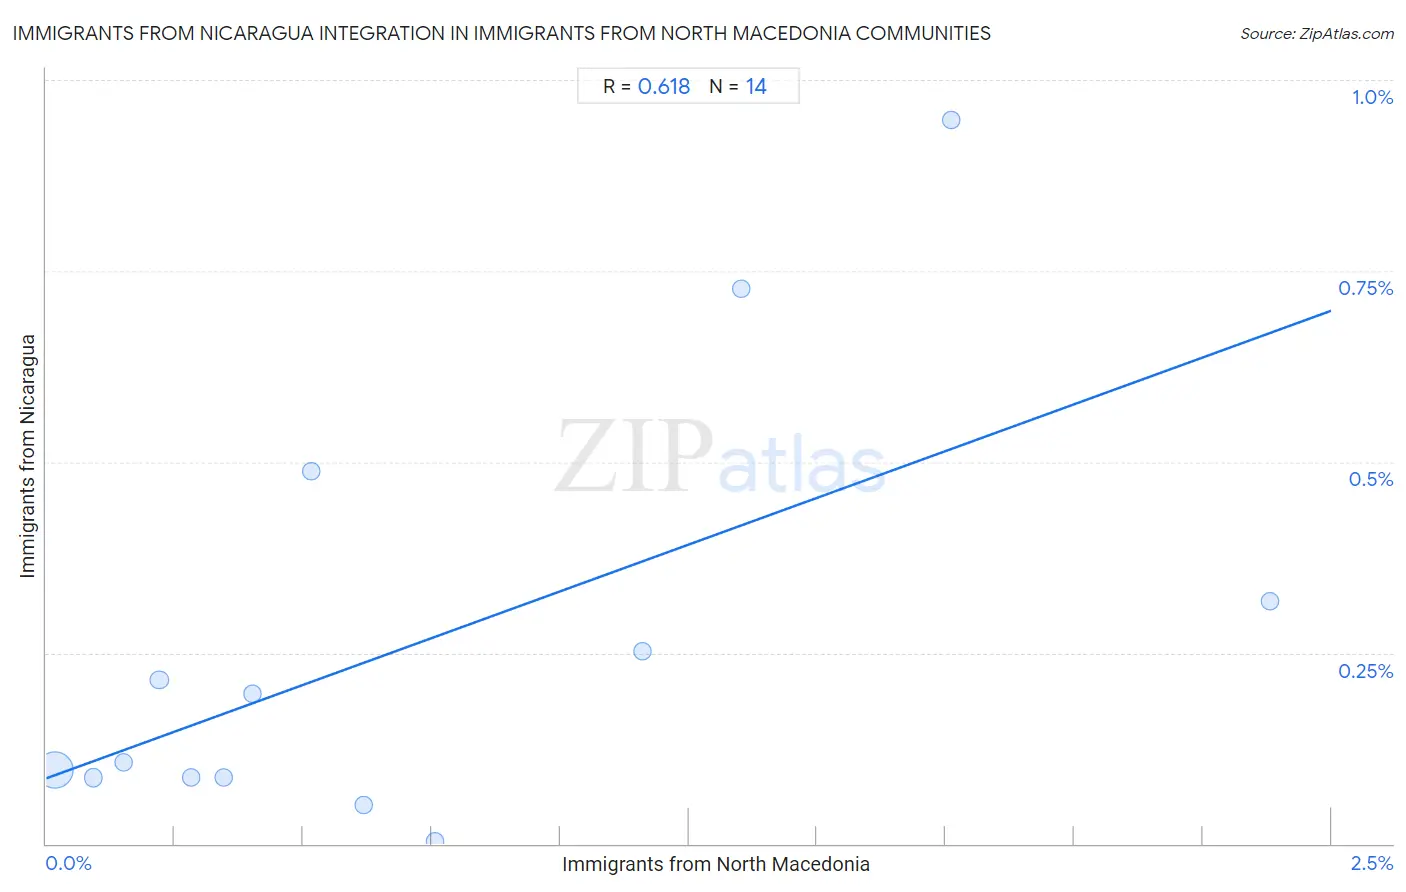 Immigrants from North Macedonia Integration in Immigrants from Nicaragua Communities